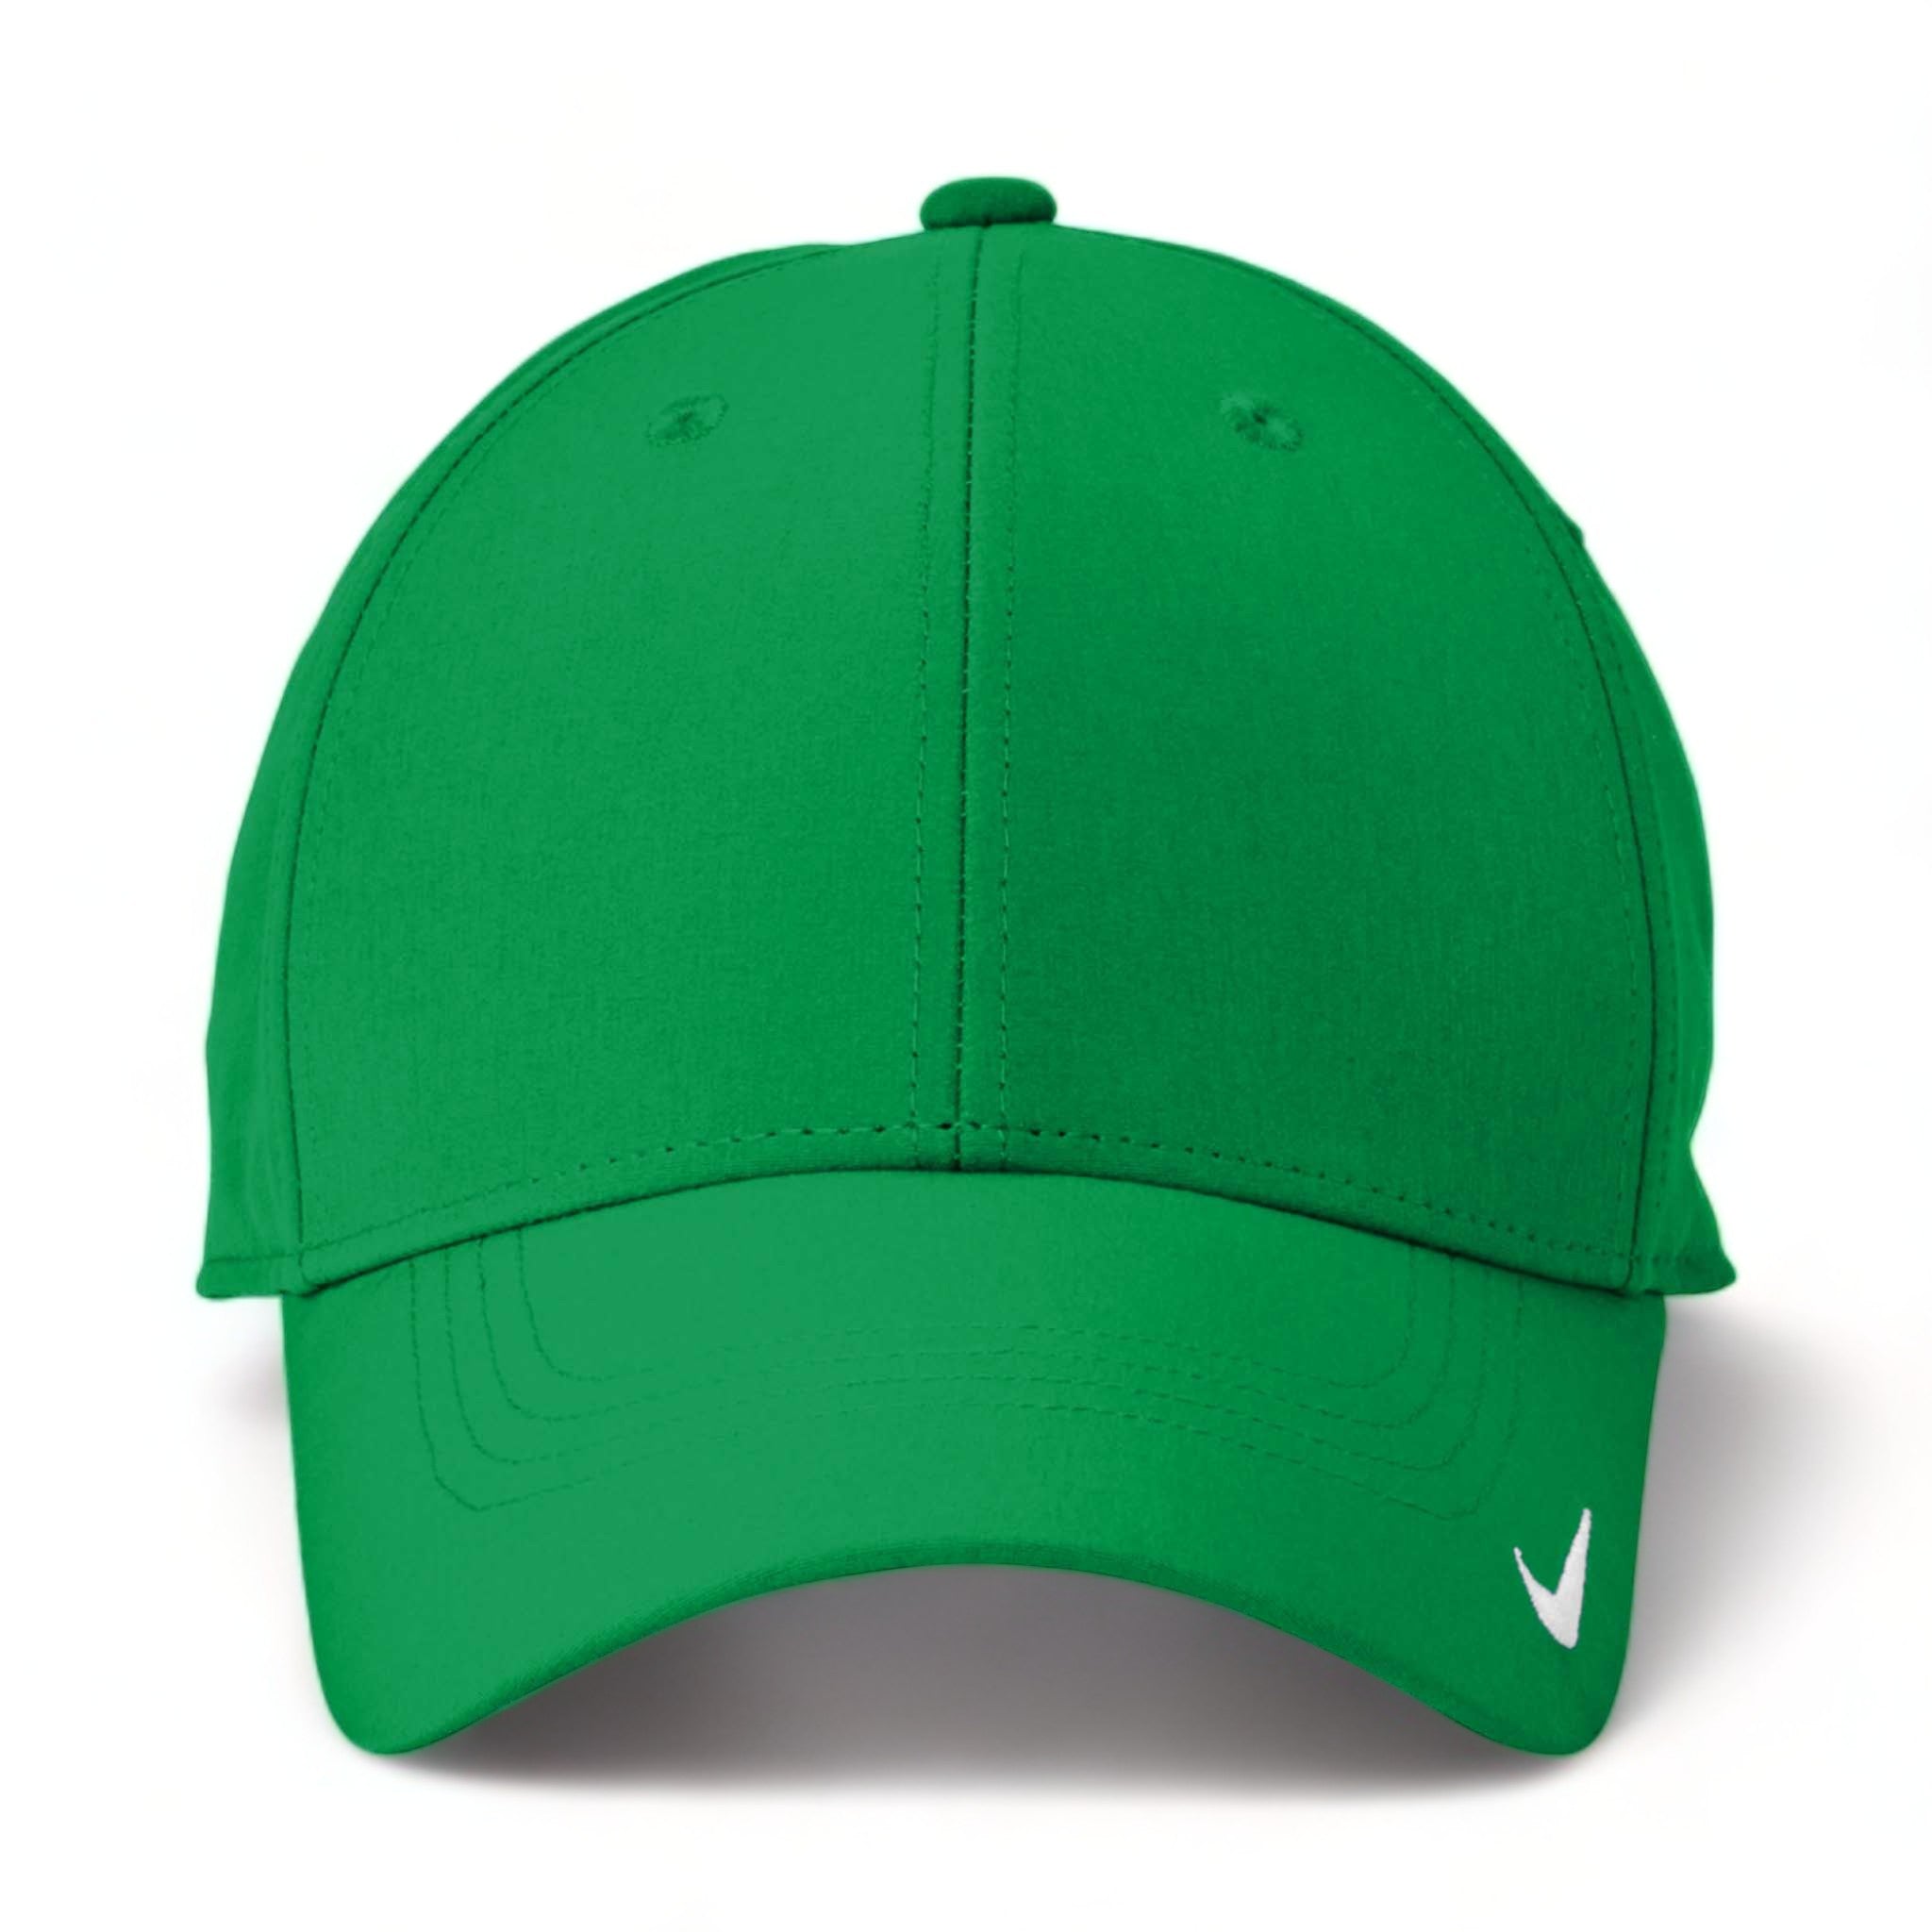 Front view of Nike NKFB6447 custom hat in apple green